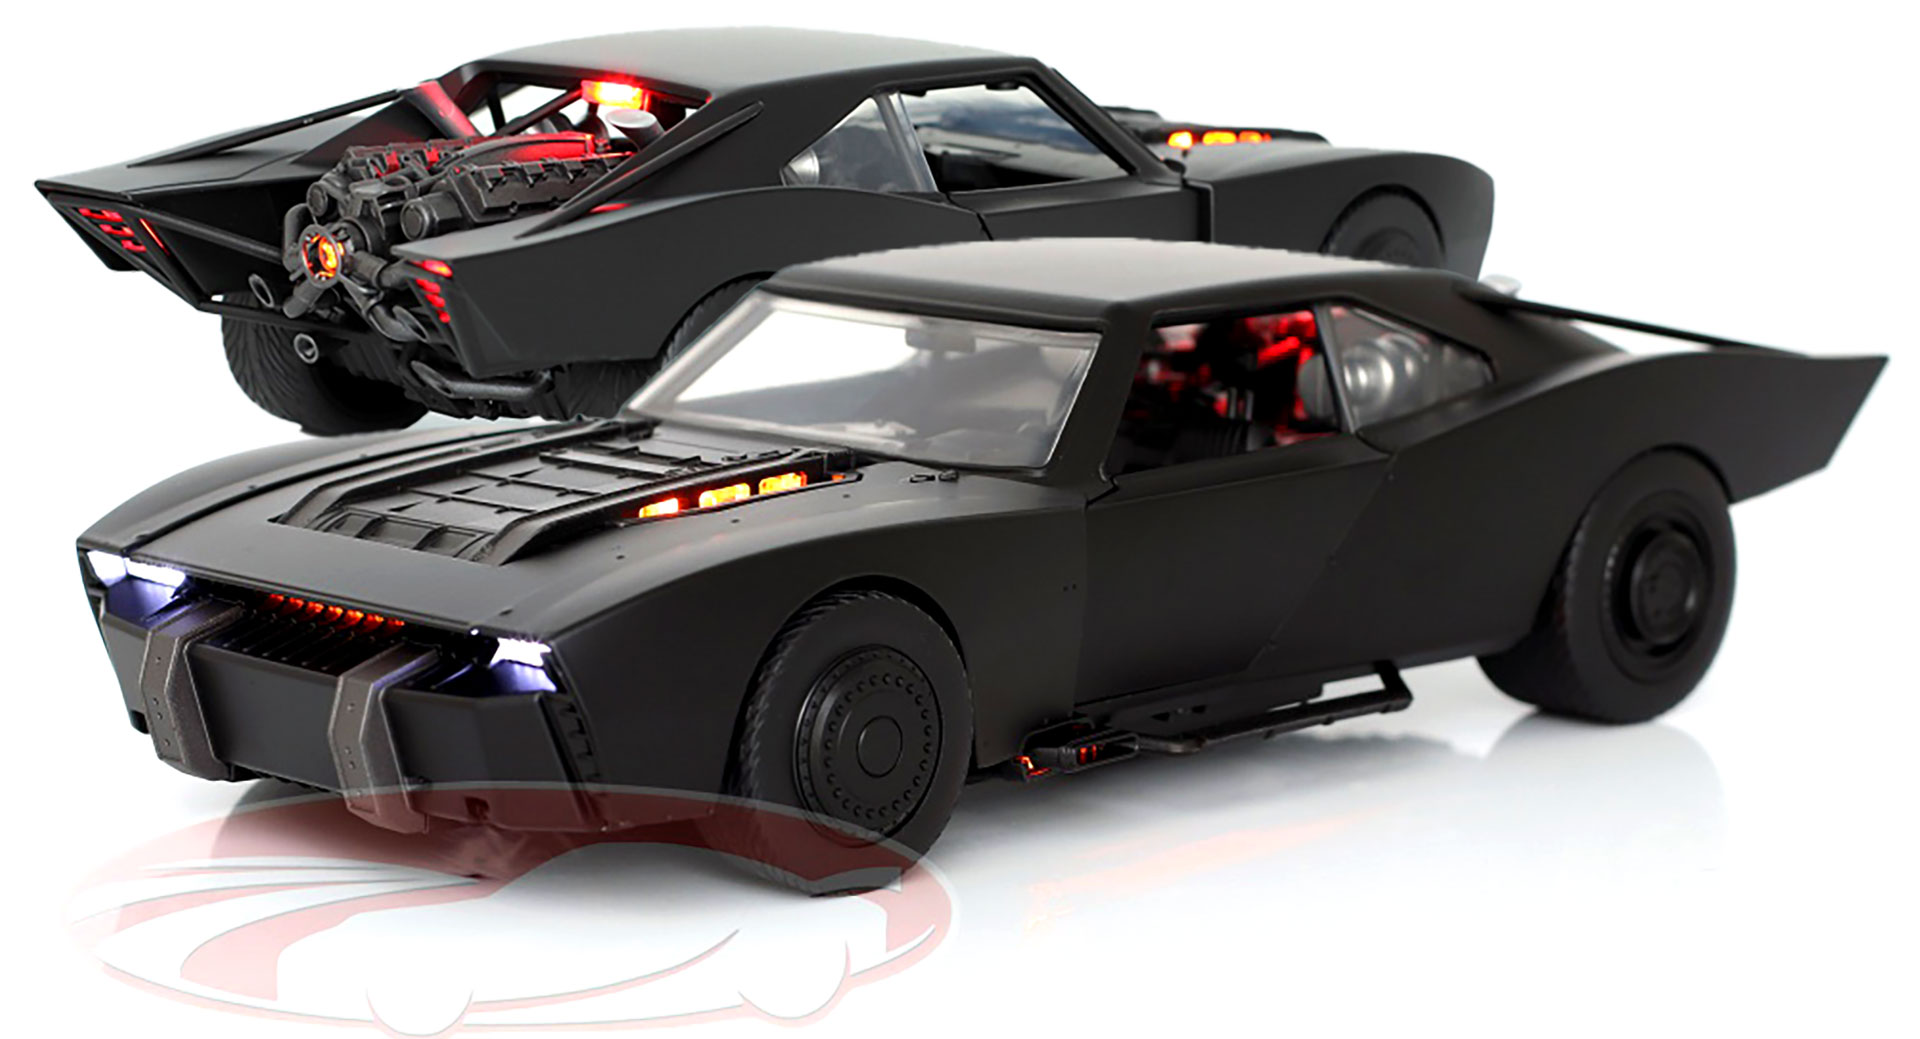 New Batmobile Toy For 'The Batman' Movie Shows Off Details Of The Car We  Hadn't Seen Before